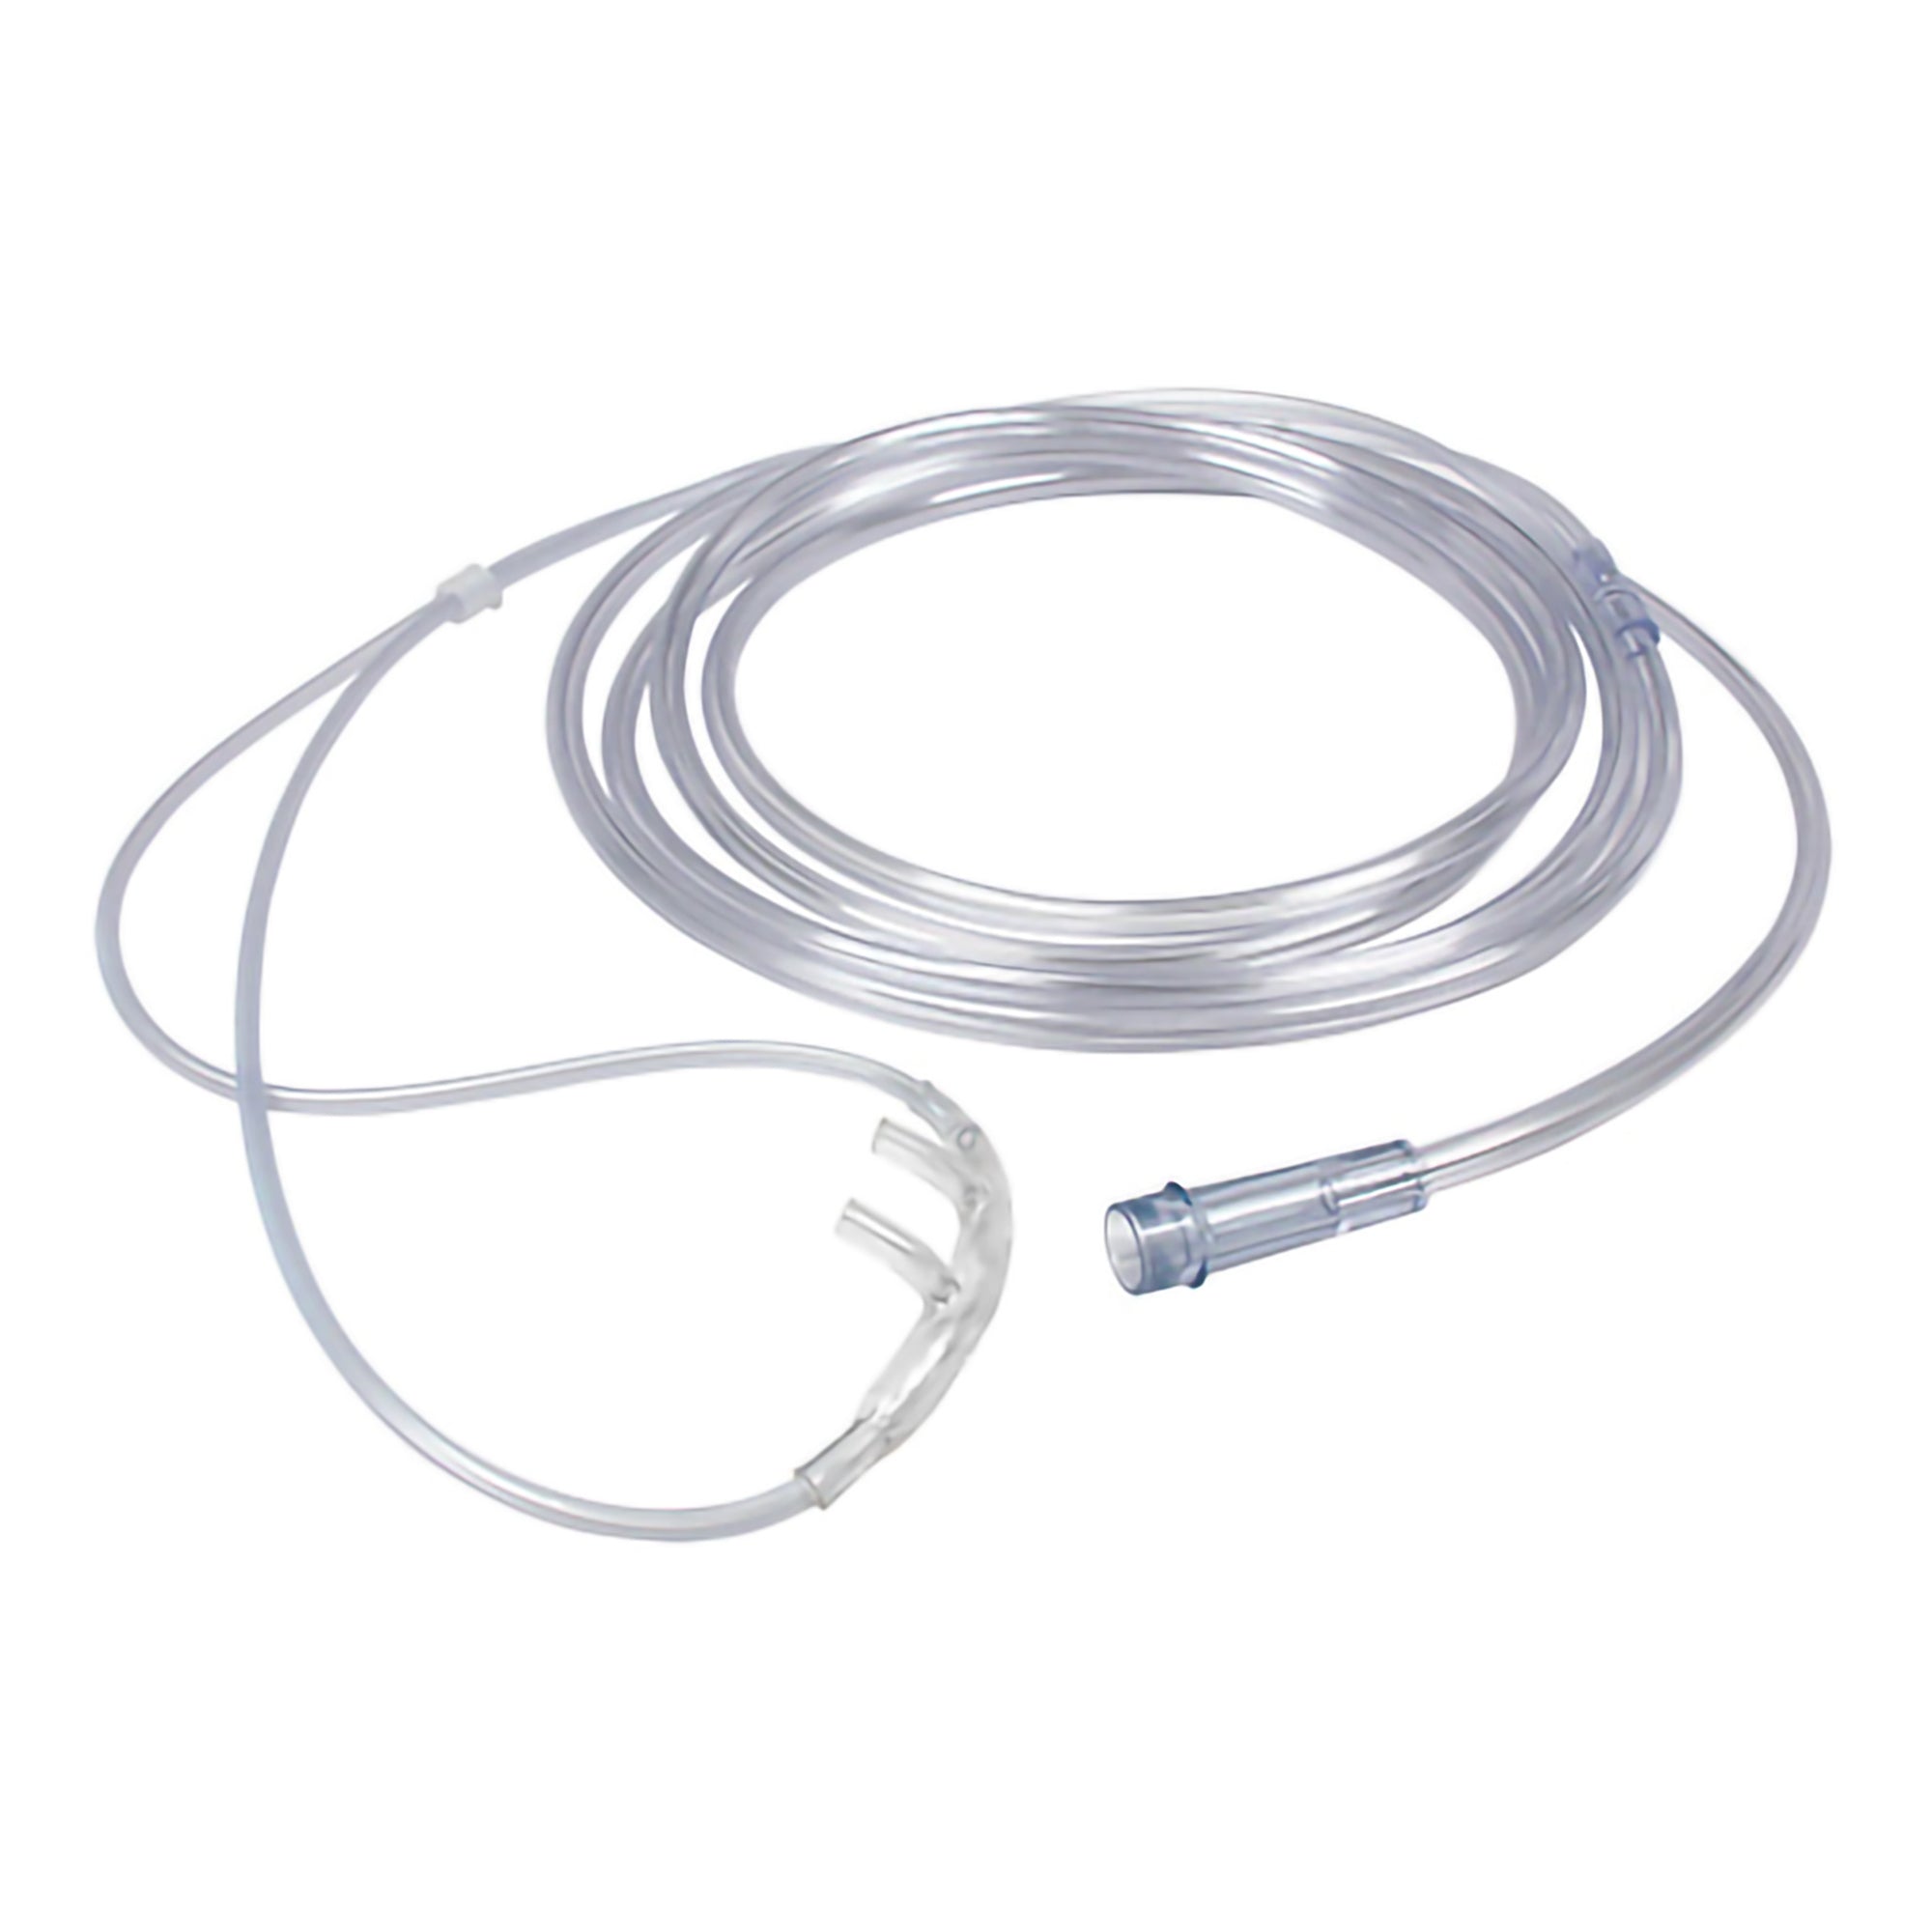 EA/1 - Sunset Oxygen Nasal Cannula, with 7' Supply Tube, Adult - Best Buy Medical Supplies